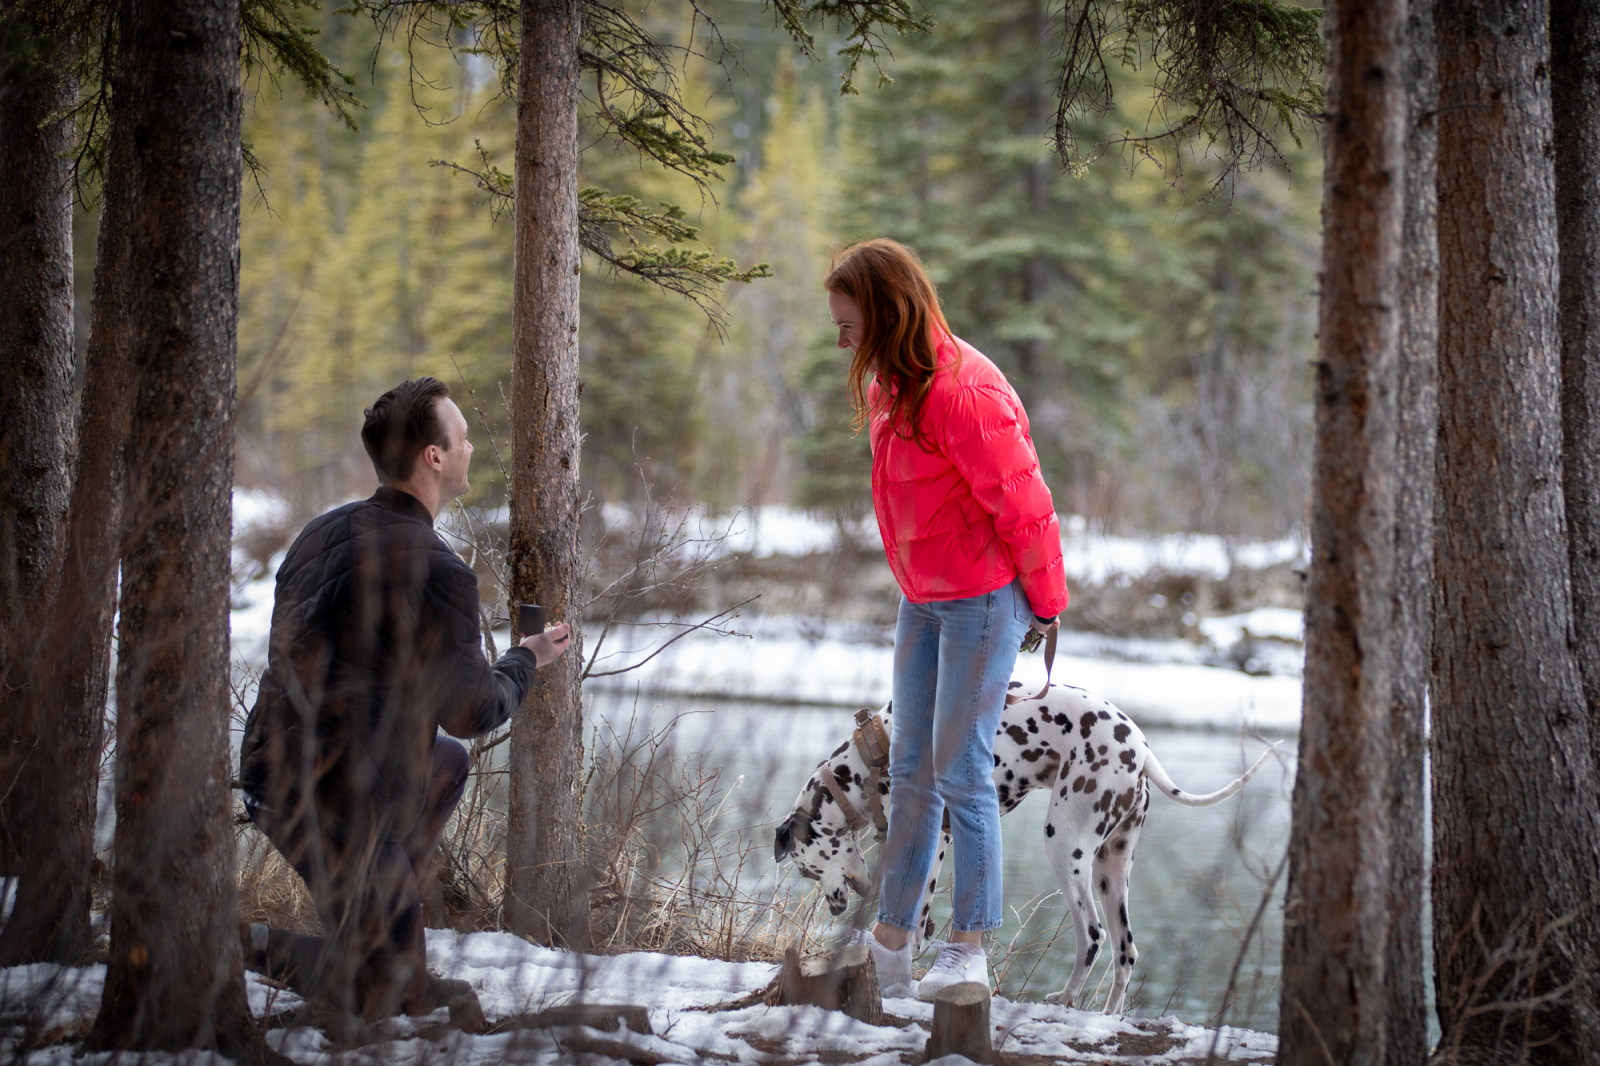 Canmore Engagement Photographers, Surprise proposal photographers  Eric Daigle Photography